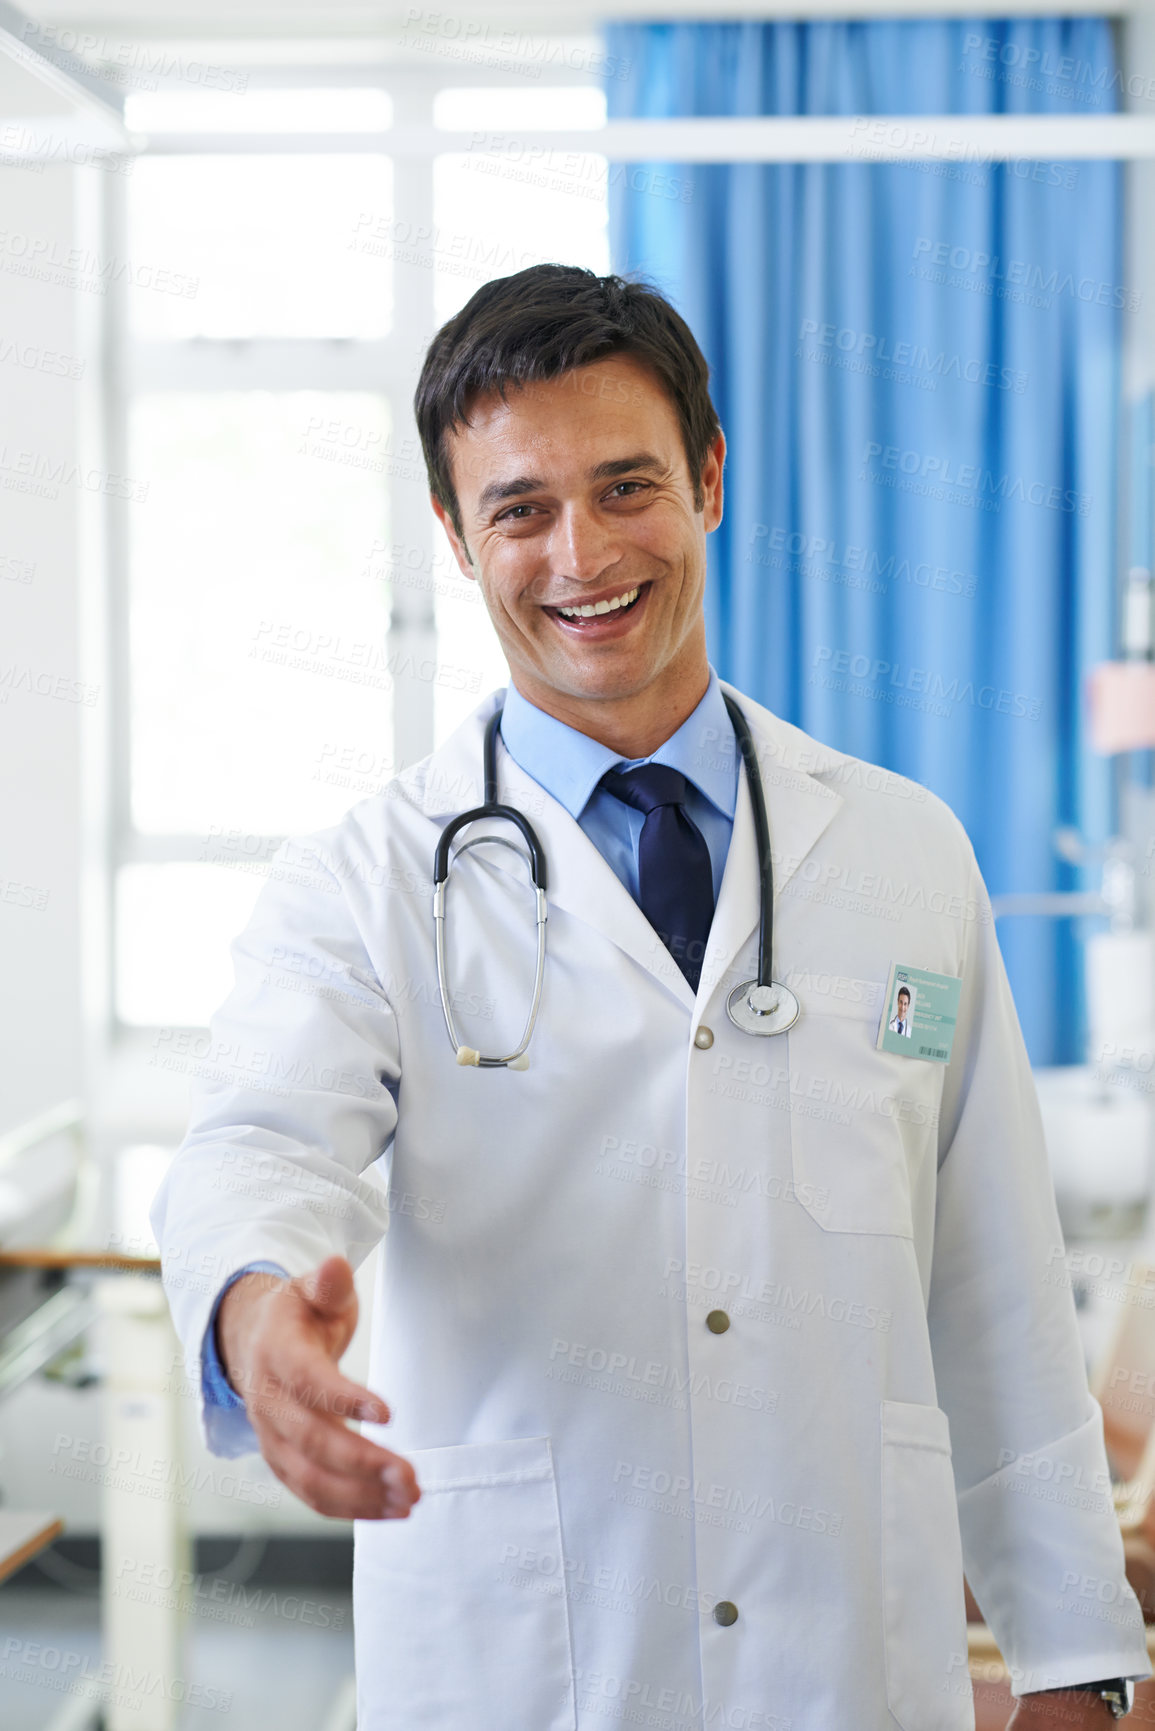 Buy stock photo Portrait of a handsome young doctor extending his hand in greeting